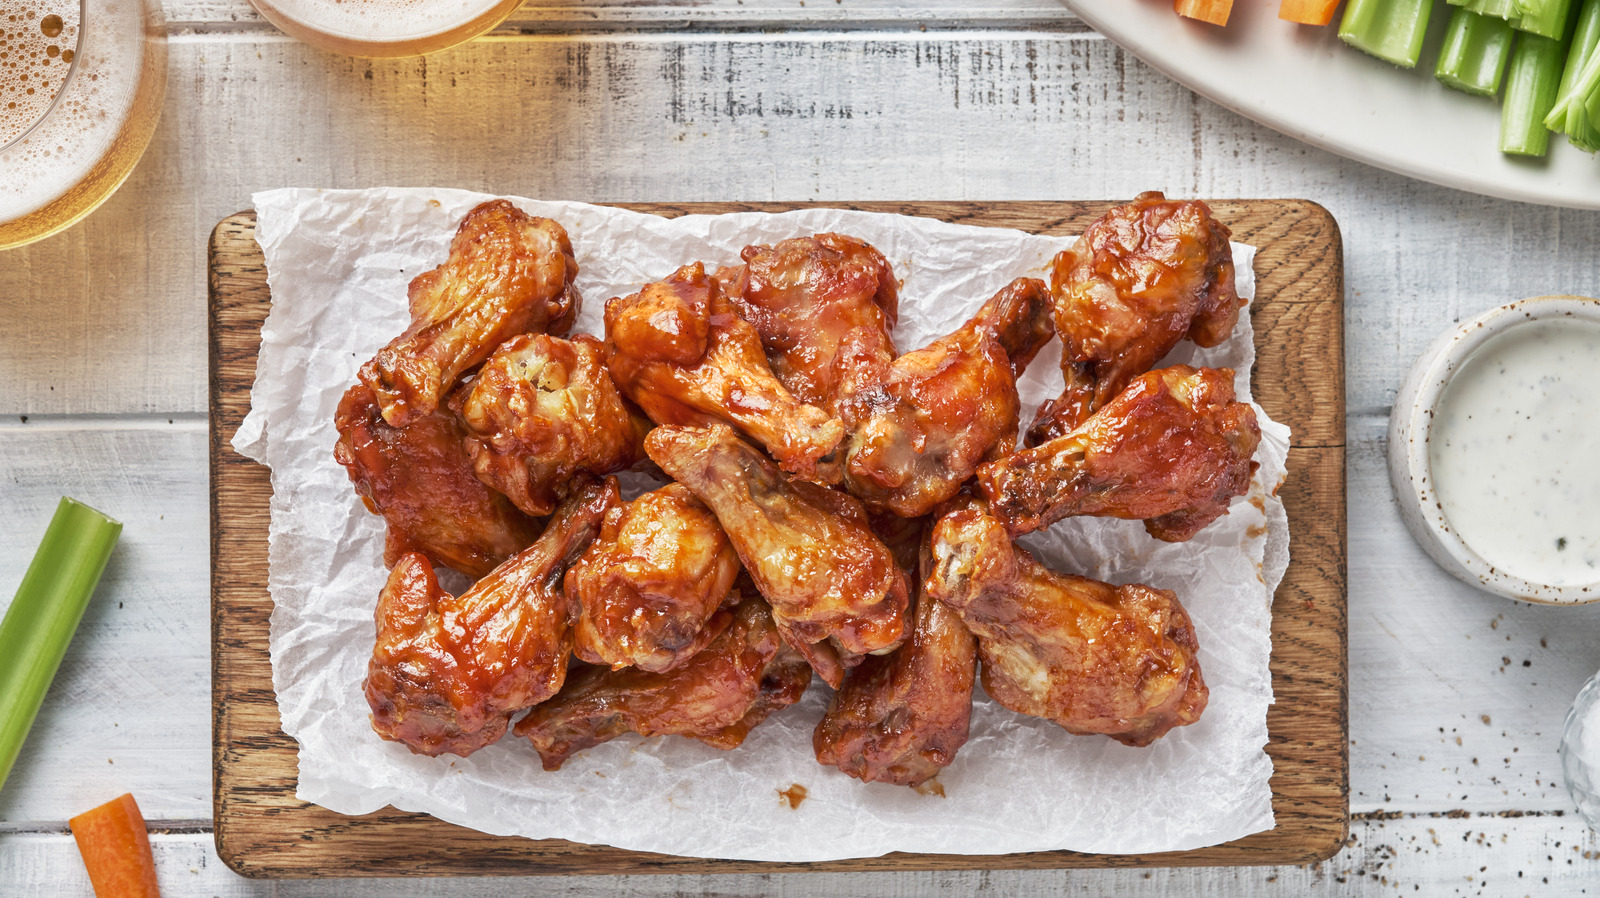 Over 1 Billion Chicken Wings Are Expected To Be Eaten For Super Bowl 2023